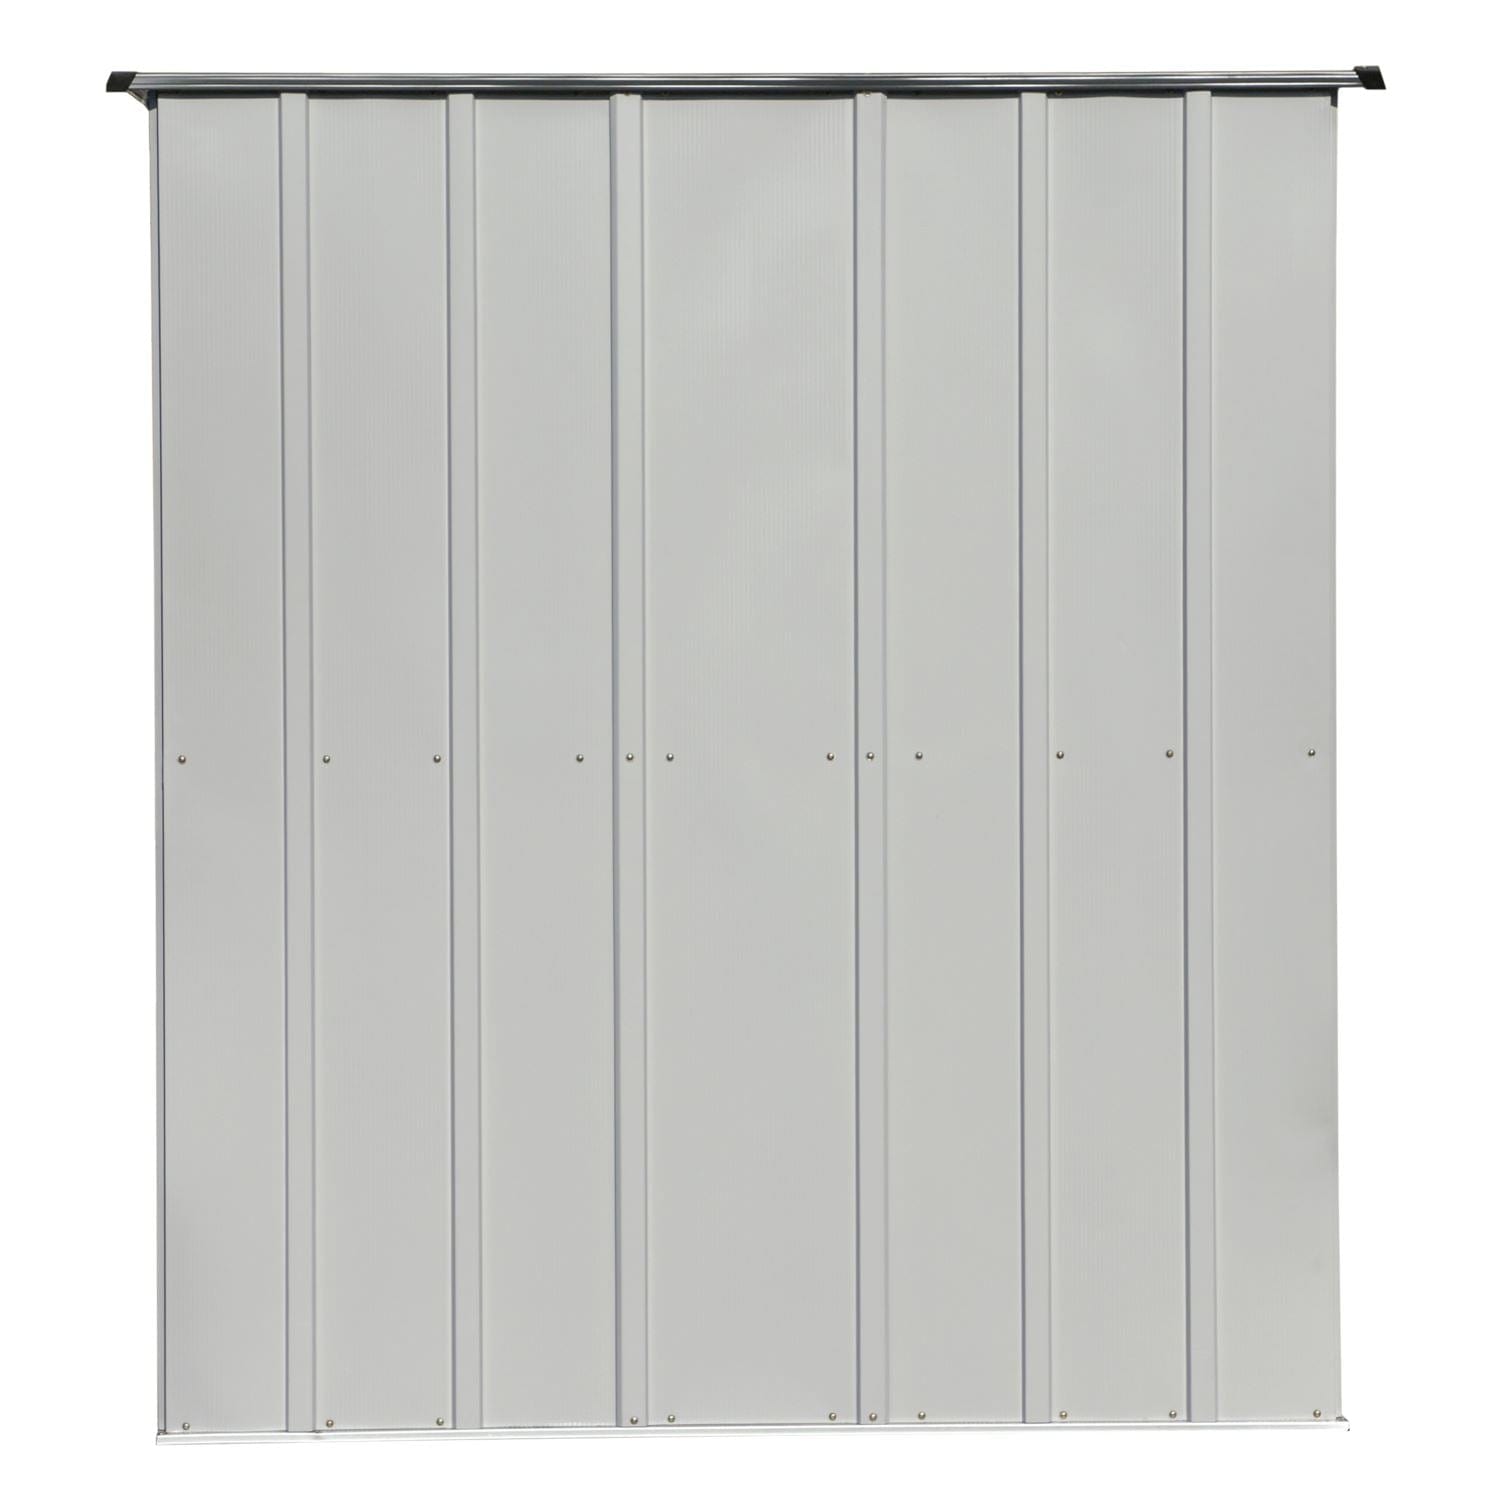 Spacemaker Metal Storage Shed Kit Spacemaker | Patio Shed 5' x 3' x 6' - Flute Grey and Anthracite PS53